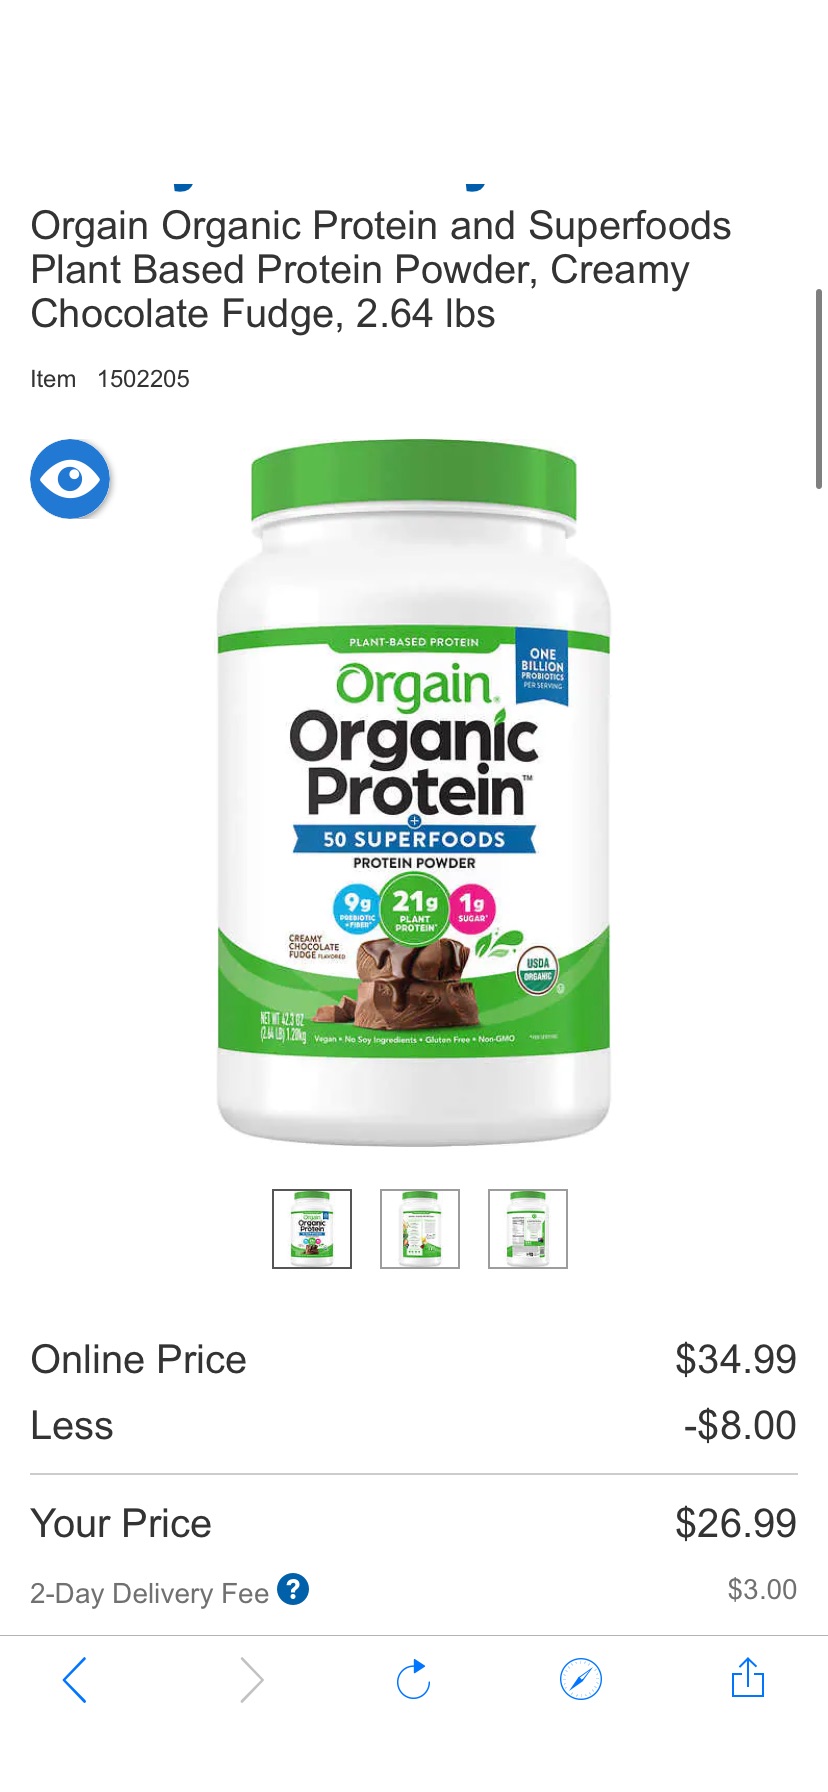 Orgain Organic Protein and Superfoods Plant Based Protein Powder, Creamy Chocolate Fudge, 2.64 lbs  | Costco